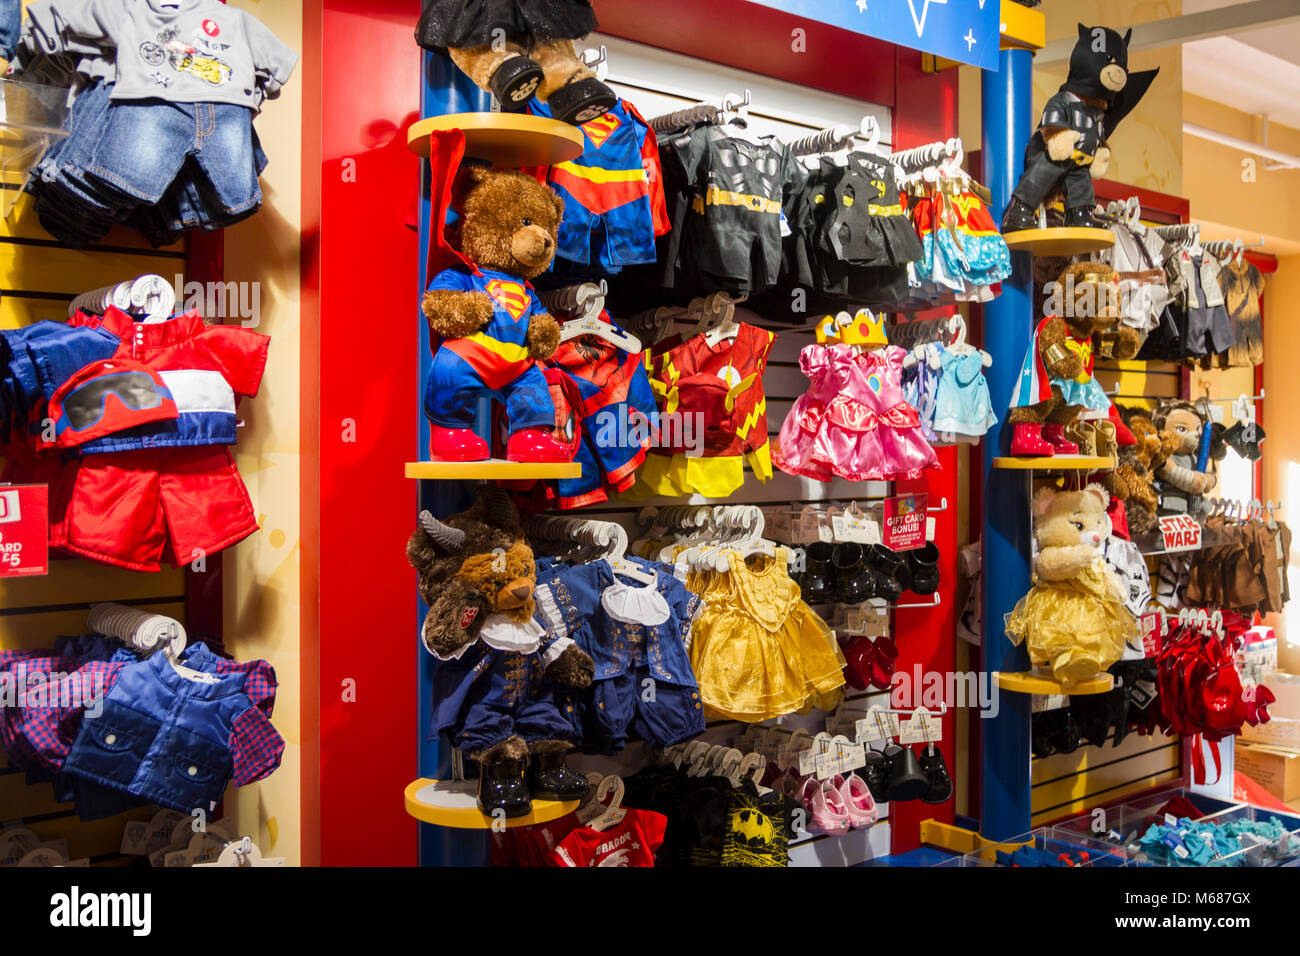 Build-A-Bear clothes display in Hamleys, toyshop, large toy store on London's Regent St, UK toy shop shelf Stock Photo